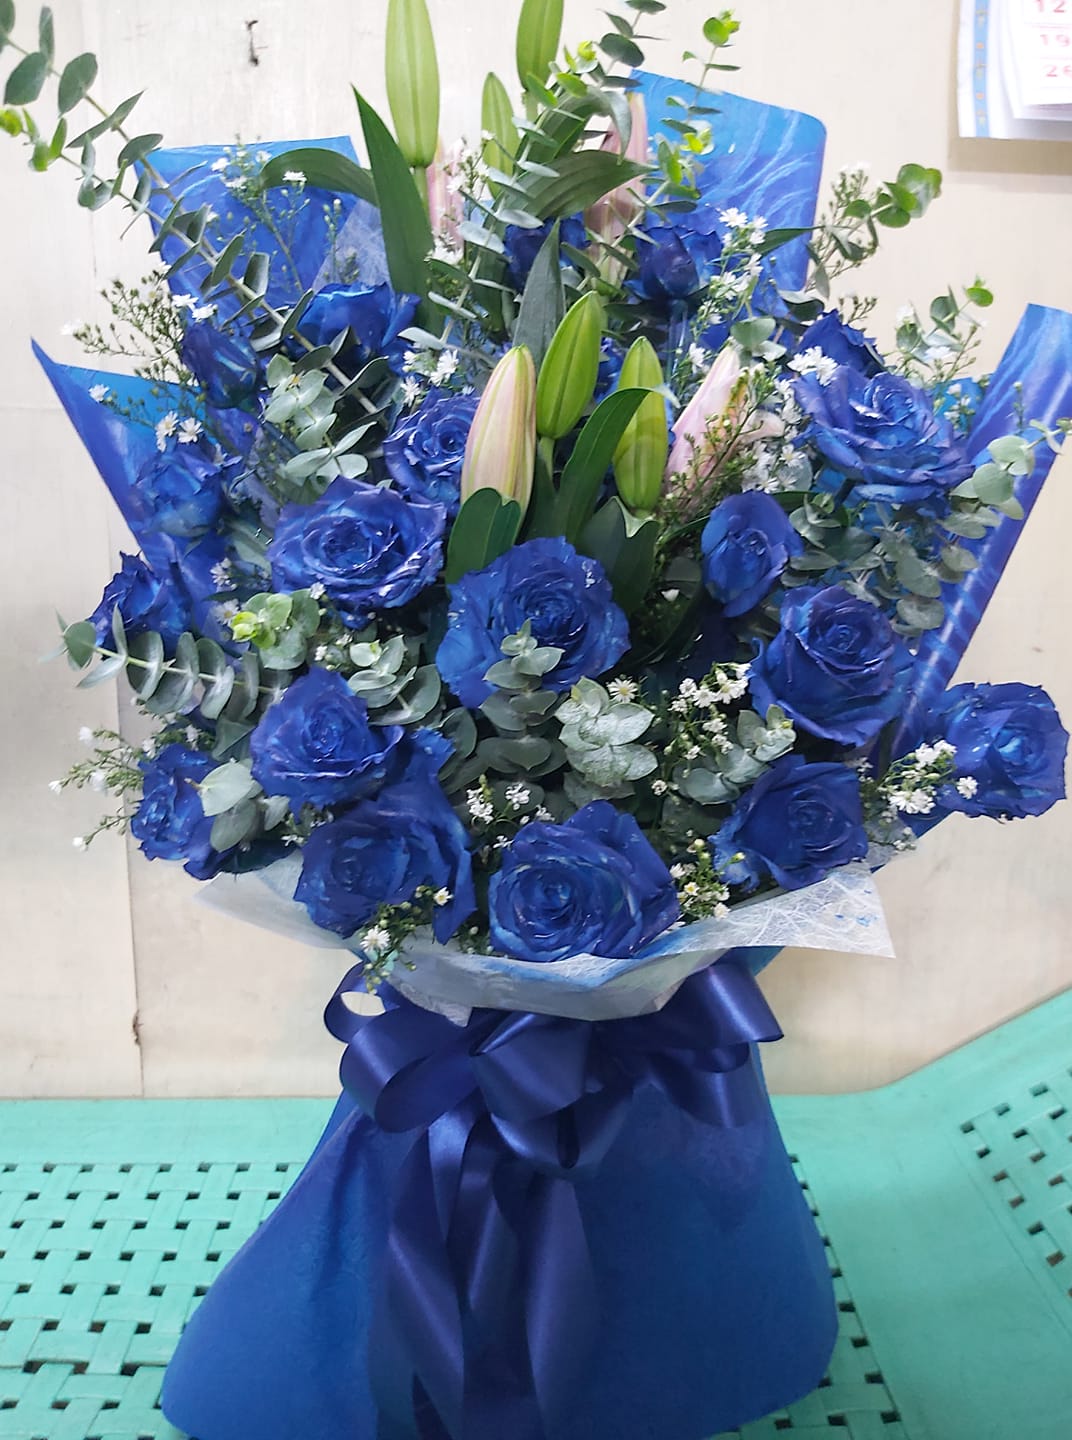 Blue roses bouquet with stargazer